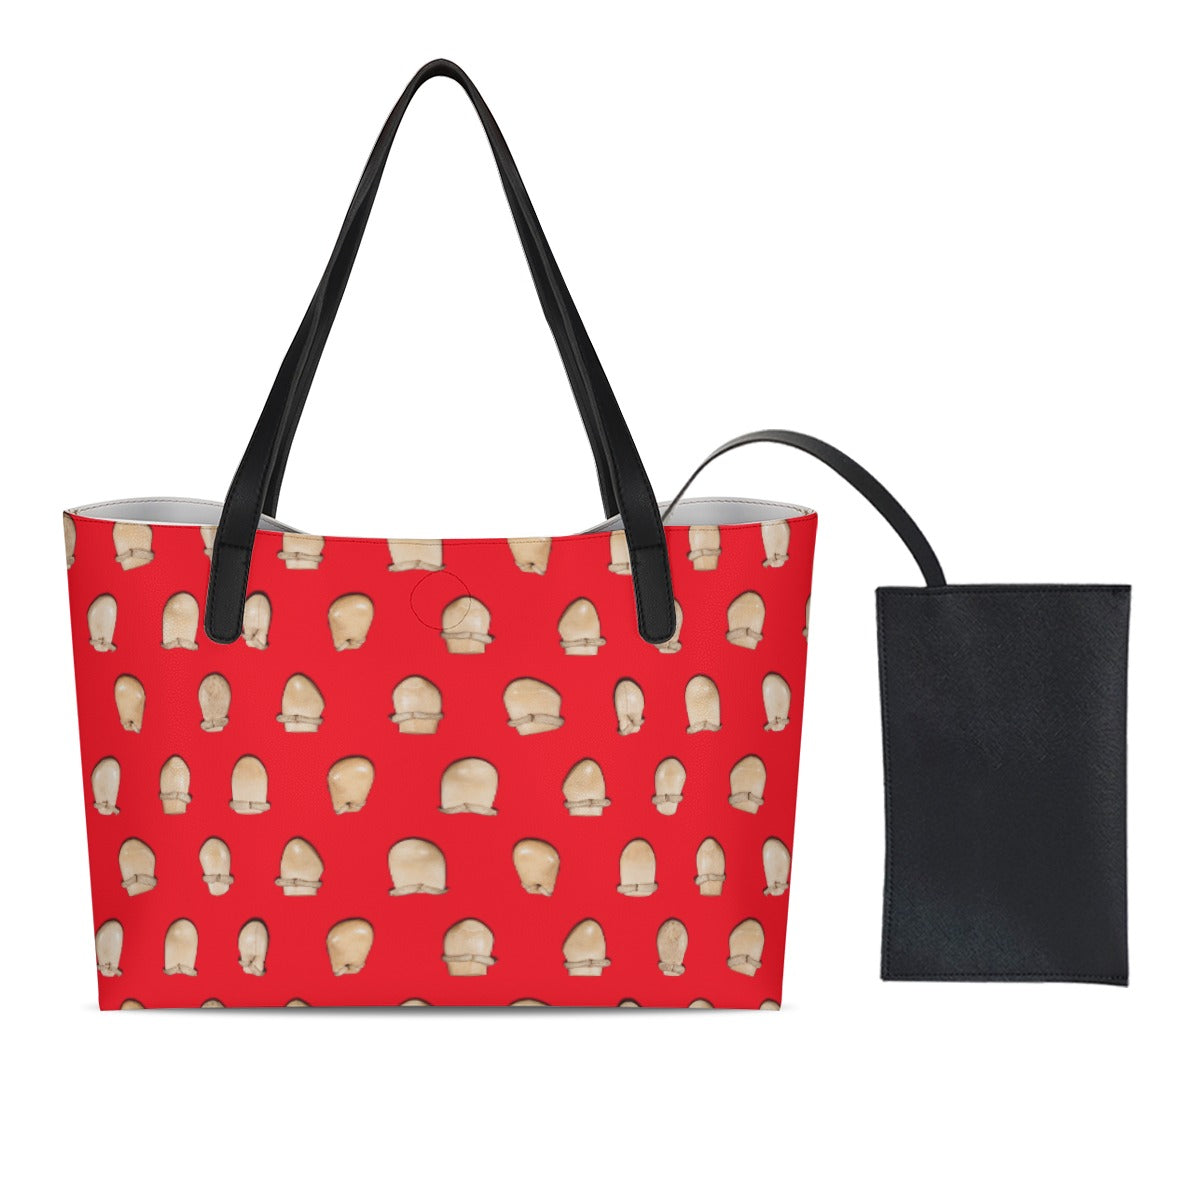 Elk Teeth on Red Shopping Tote Bag With Black Mini Purse